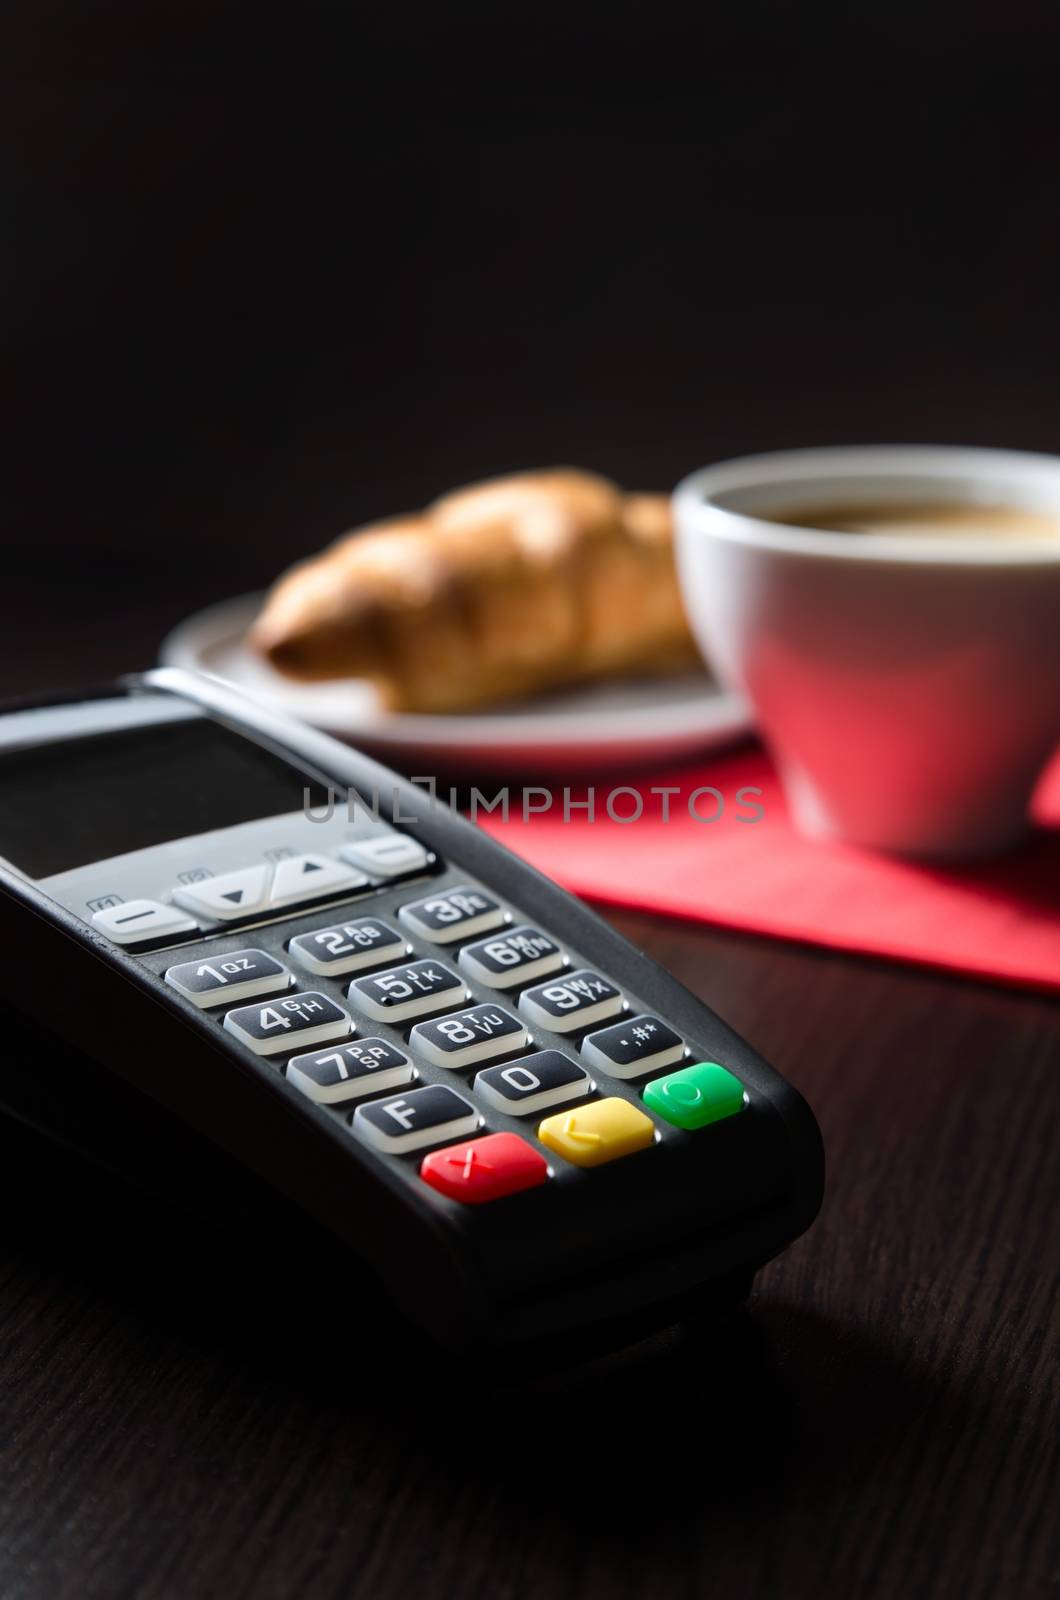 Payment terminal in restaurant. Croissaint and coffee in background